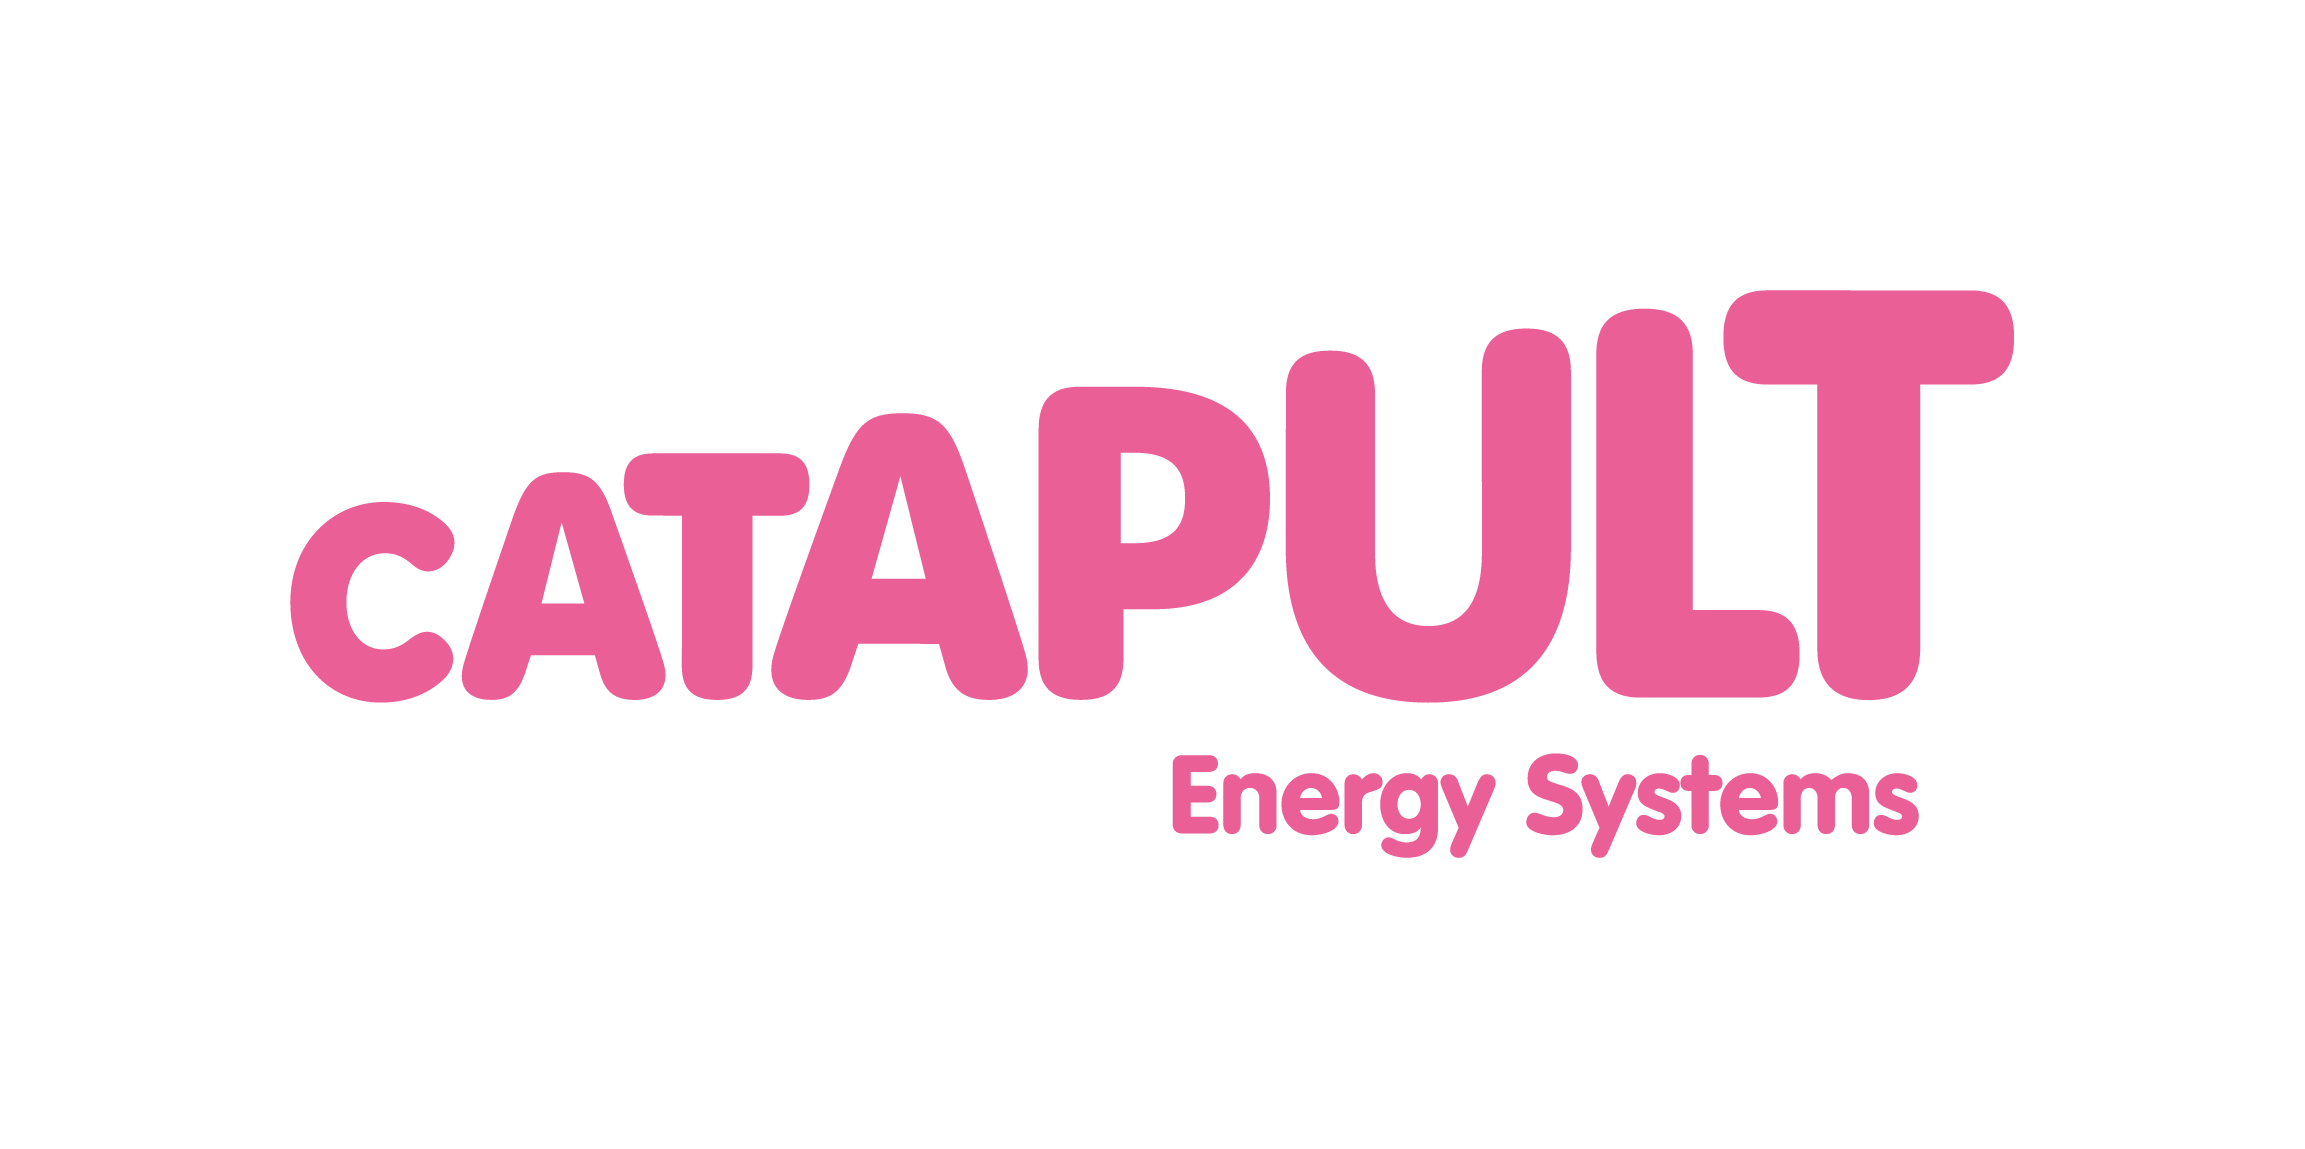 energy-systems-catapult